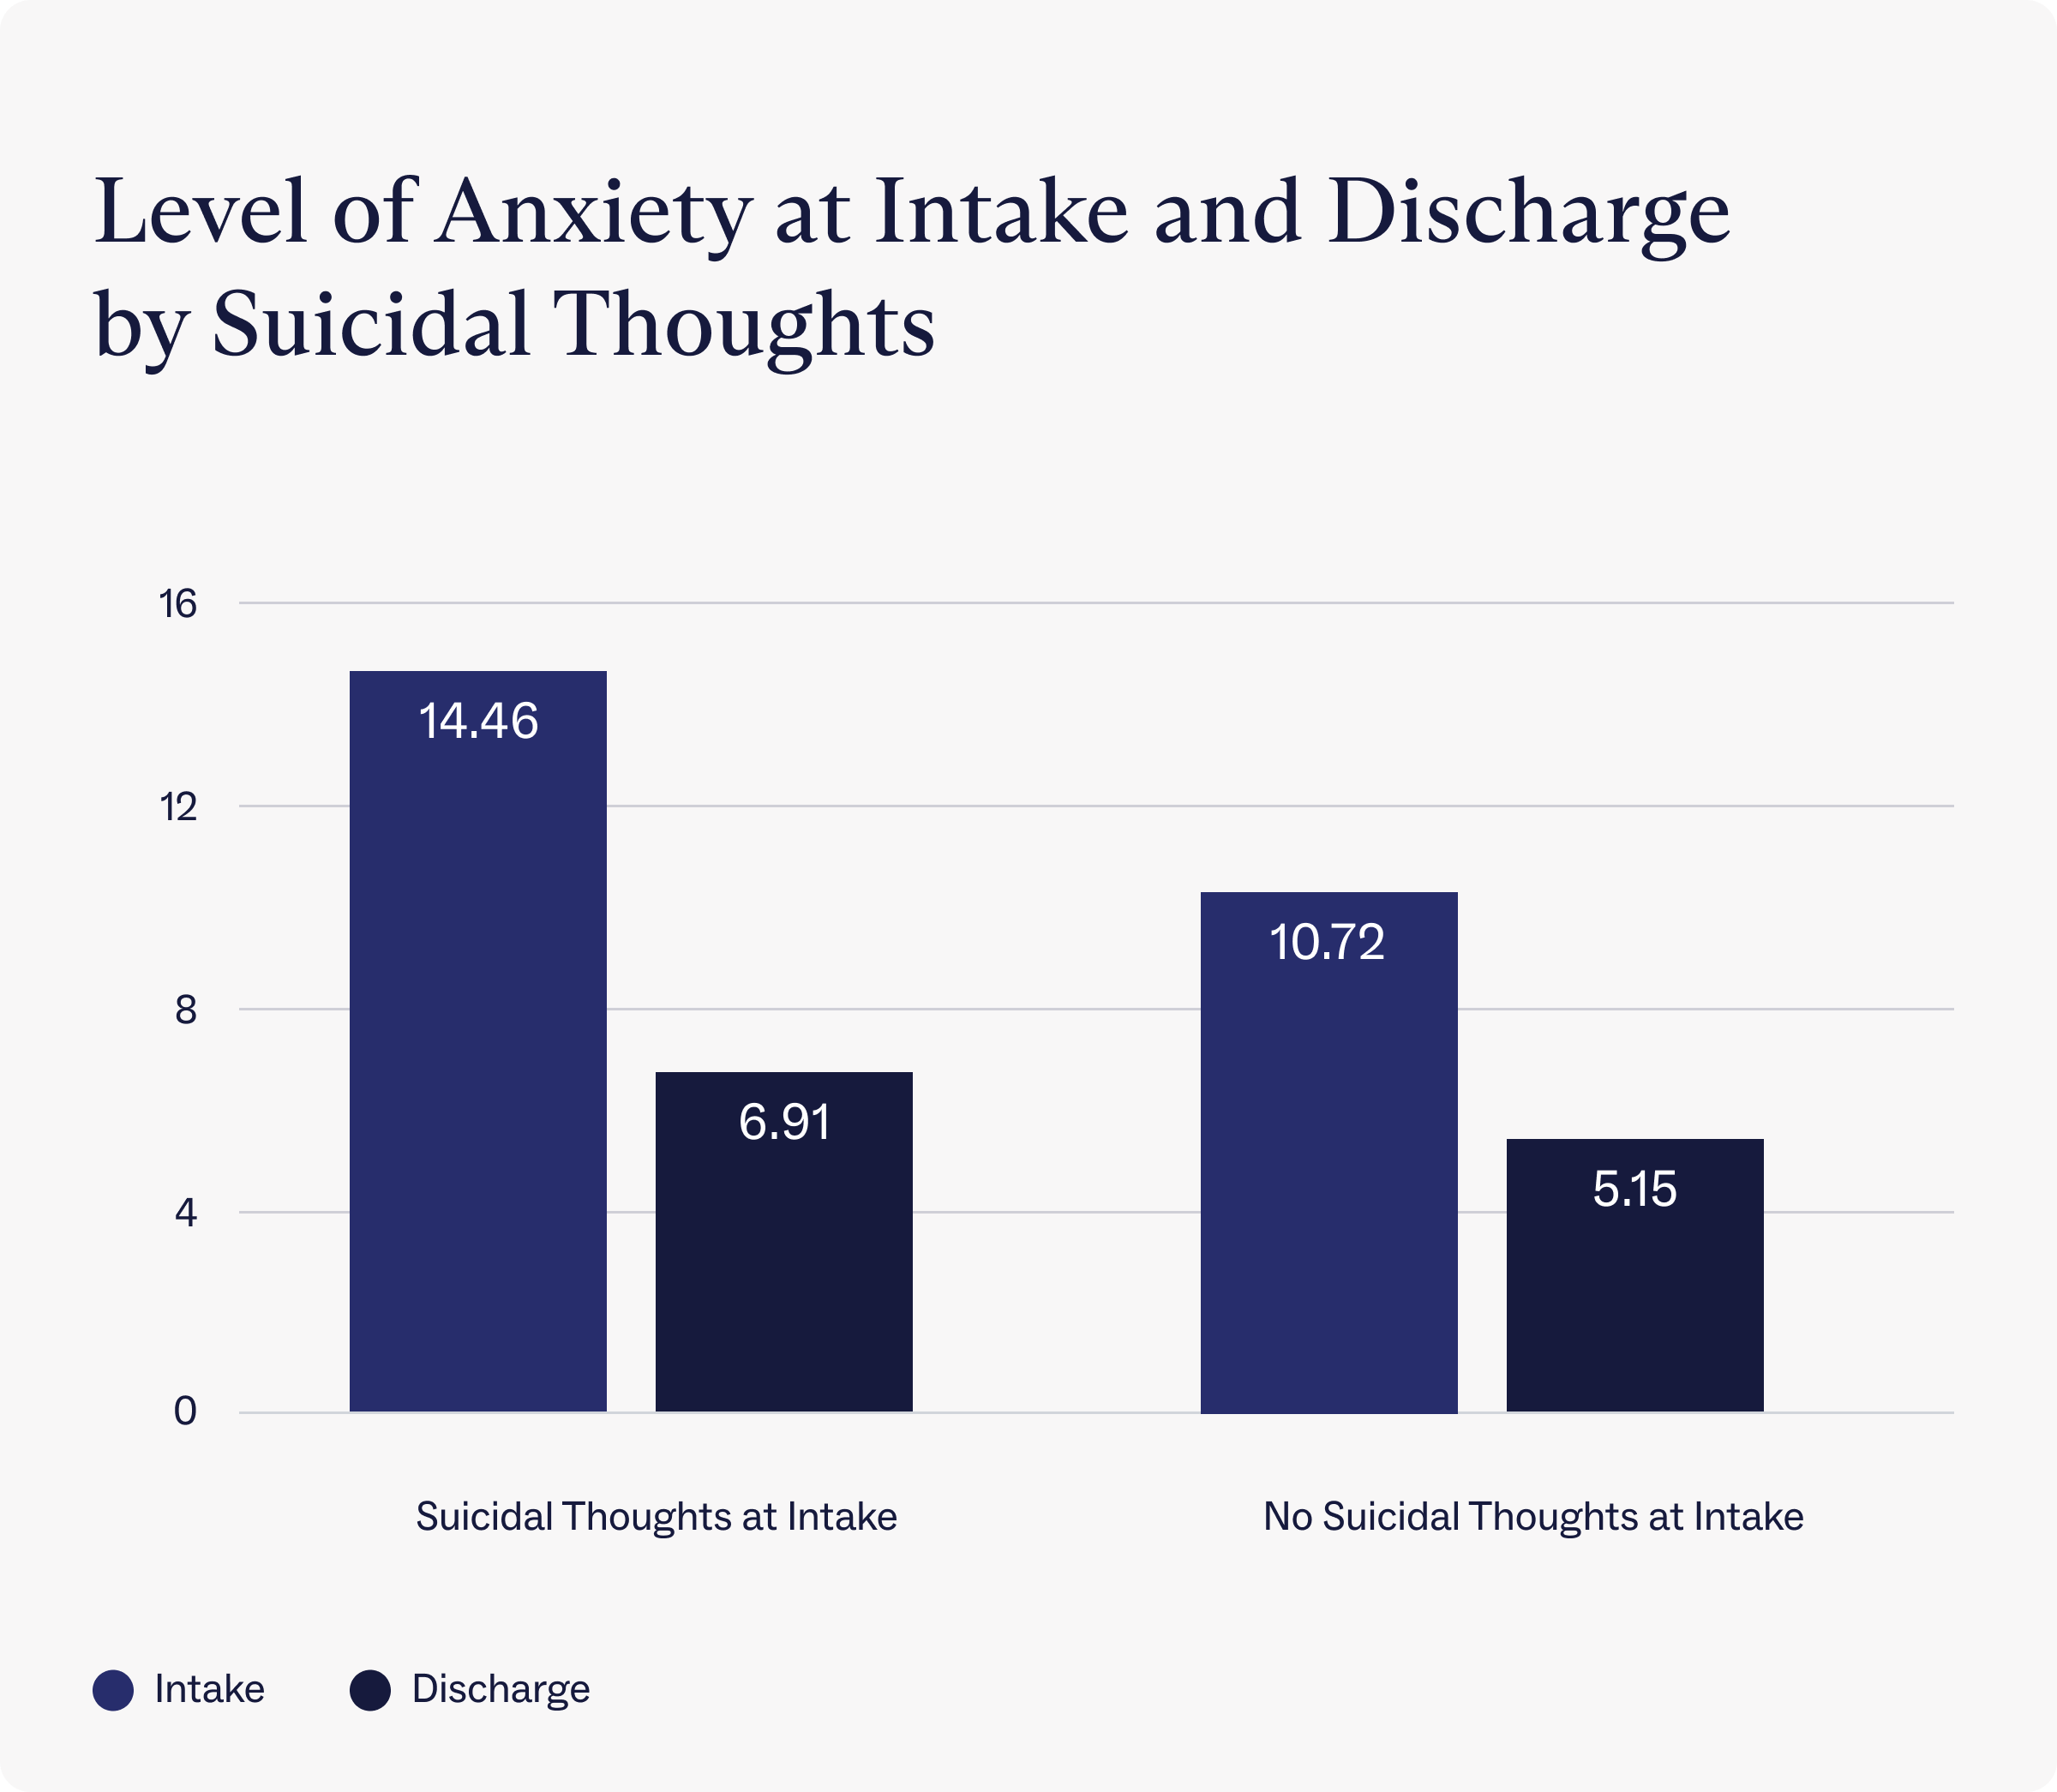 Levels of anxiety at intake and discharge by suicidal thoughts for Charlie Health clients